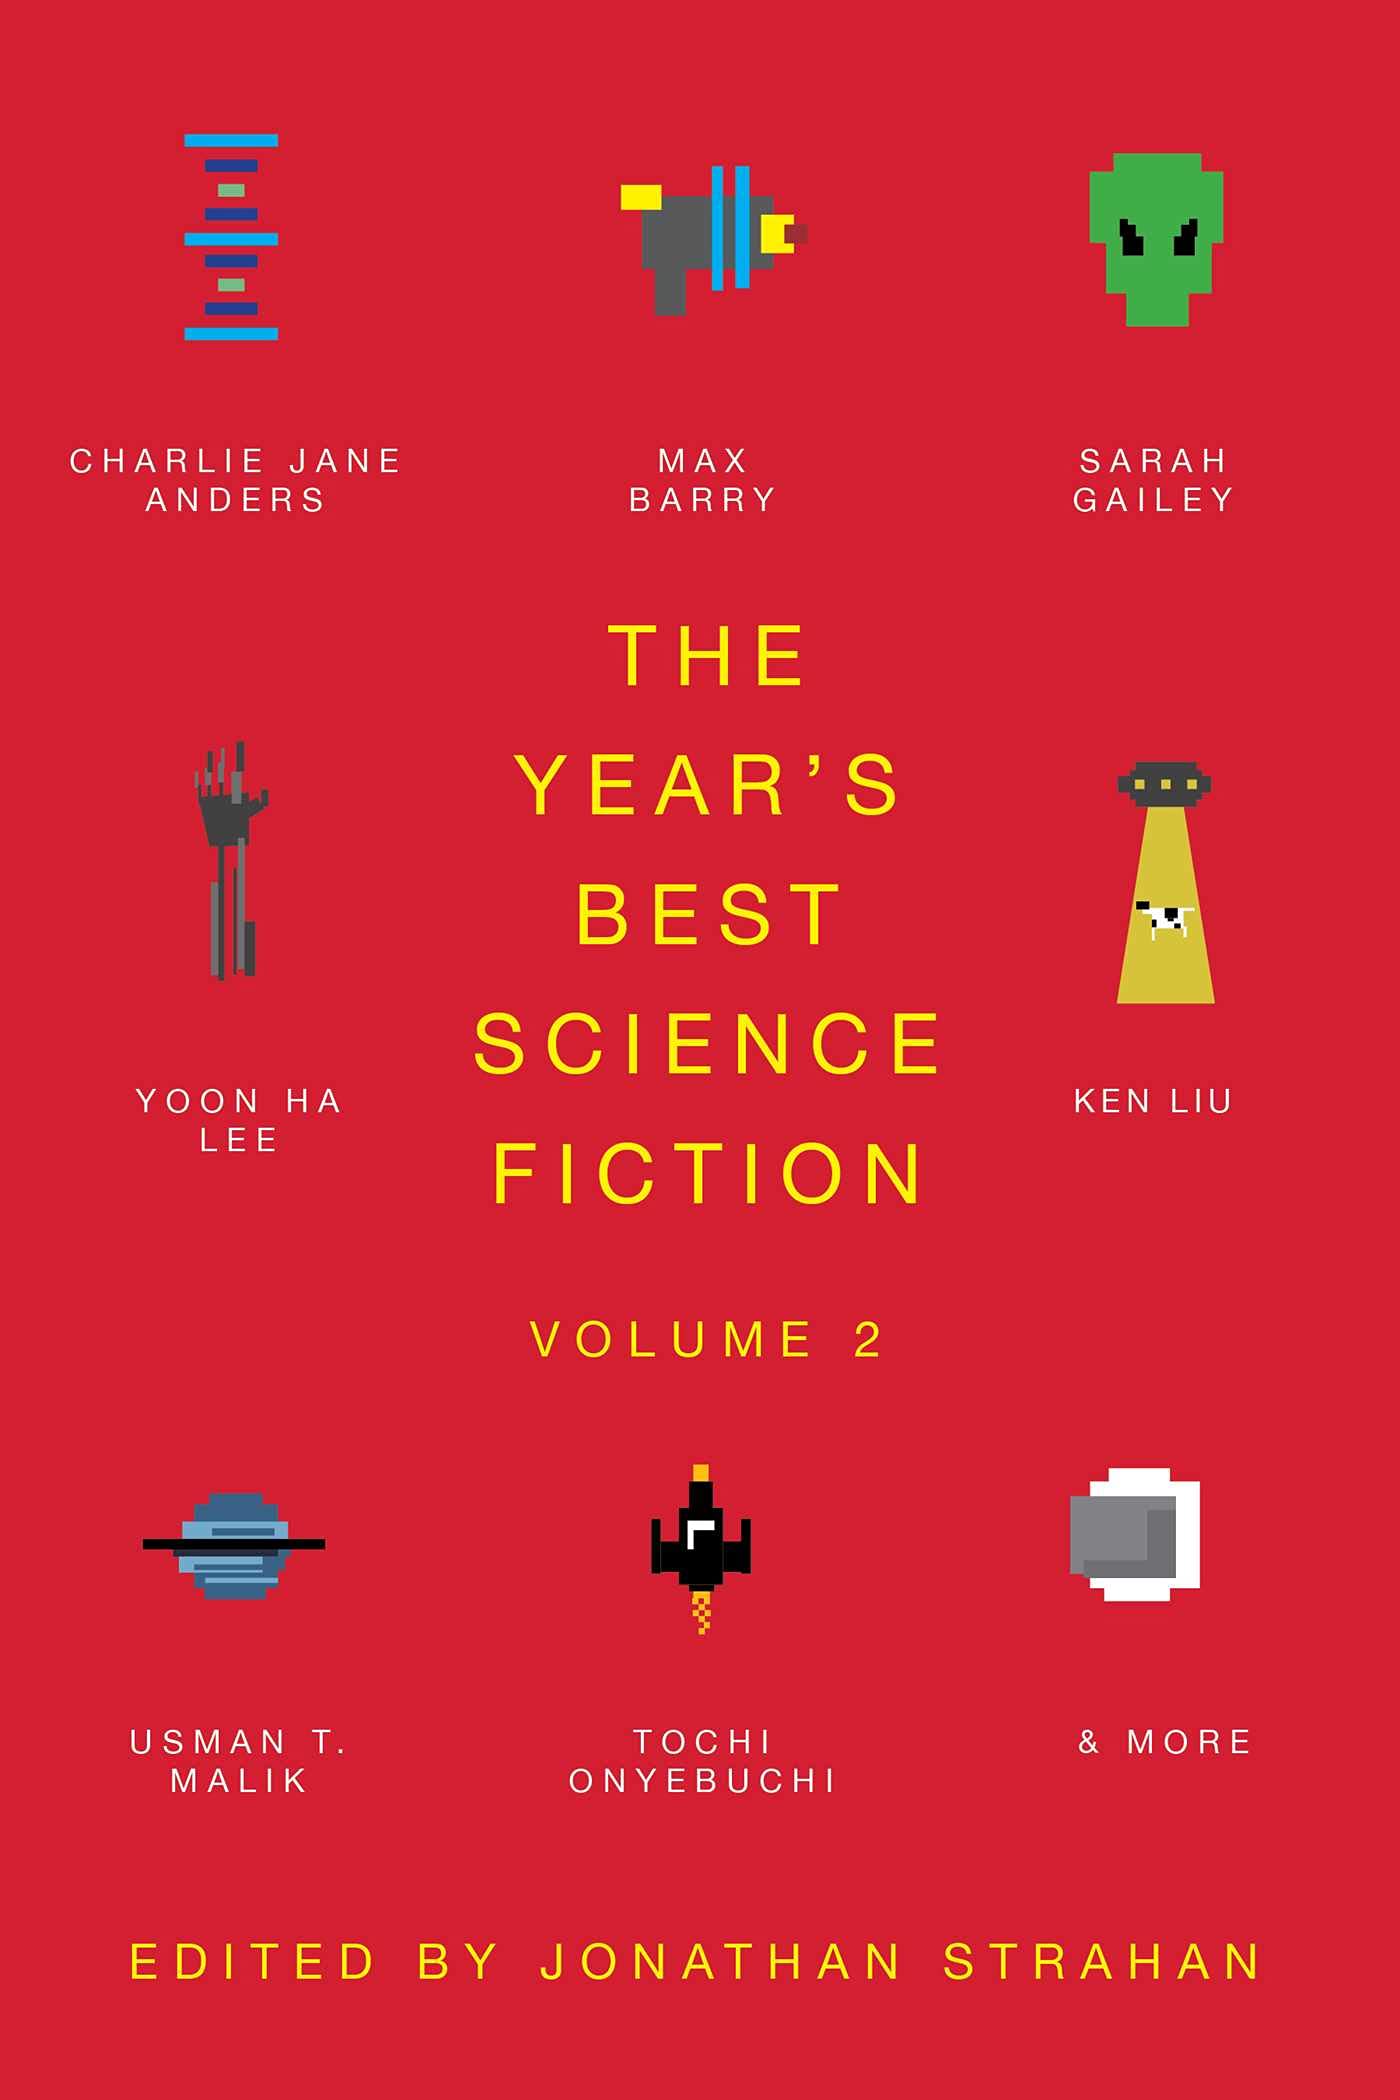 Gary K. Wolfe Reviews The Year’s Best Science Fiction, Volume 2 by